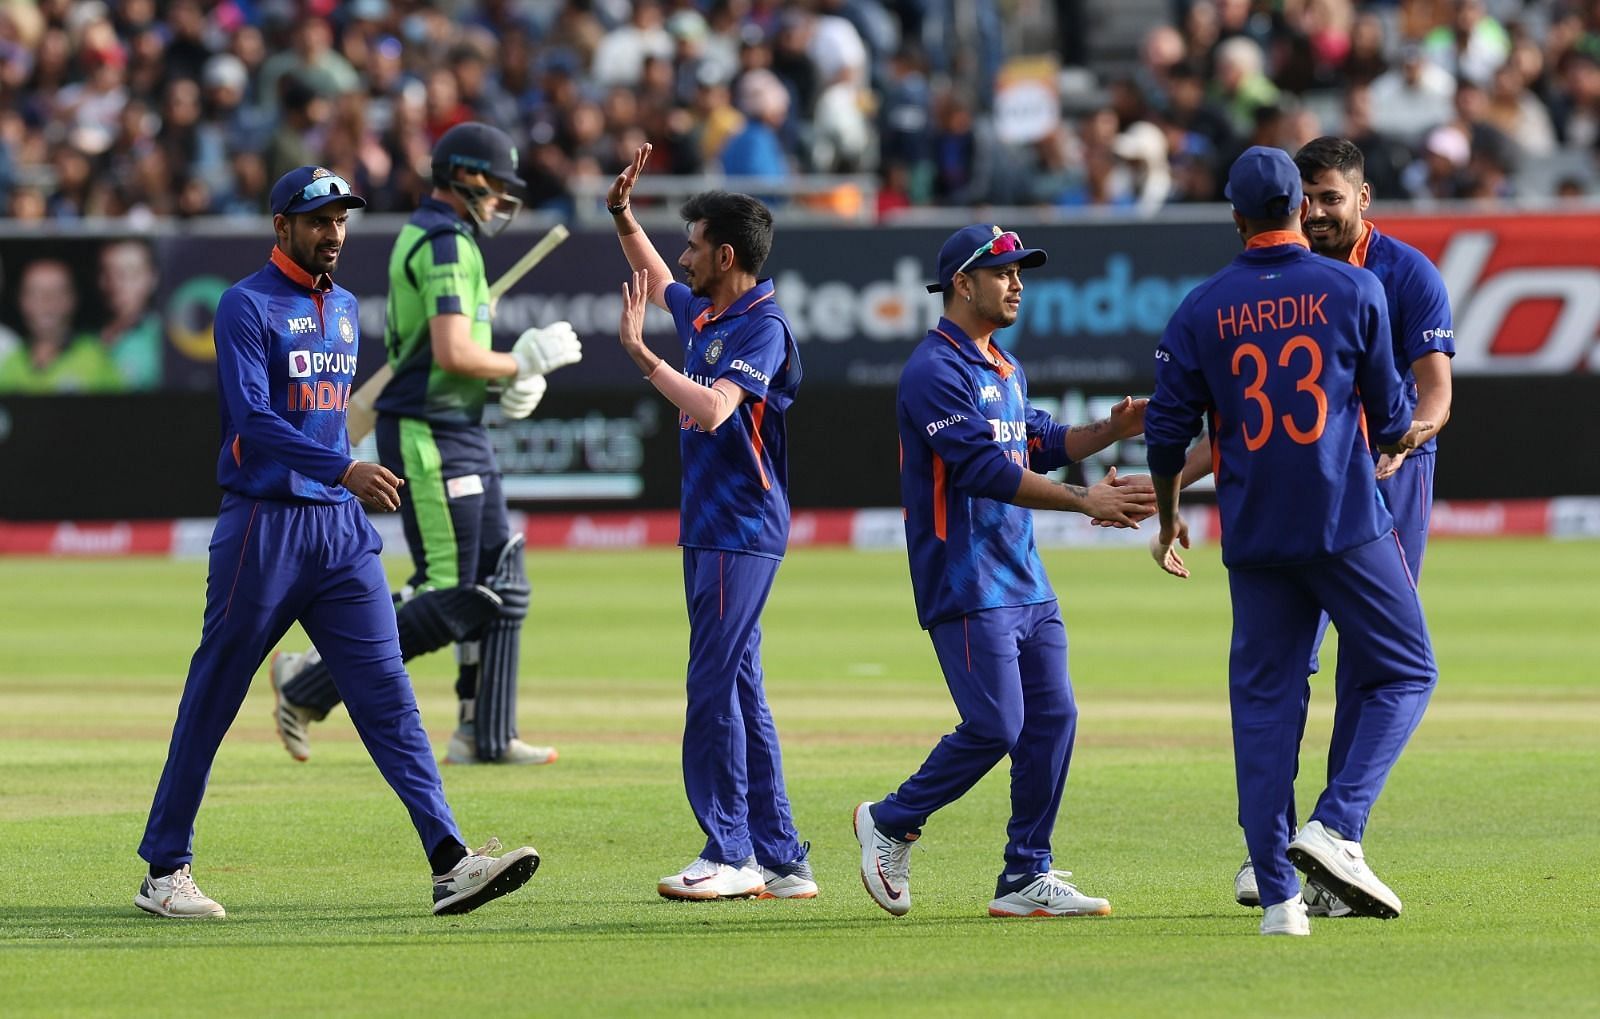 Team India registered a convincing win in the first T20I against Ireland [P/C: BCCI]